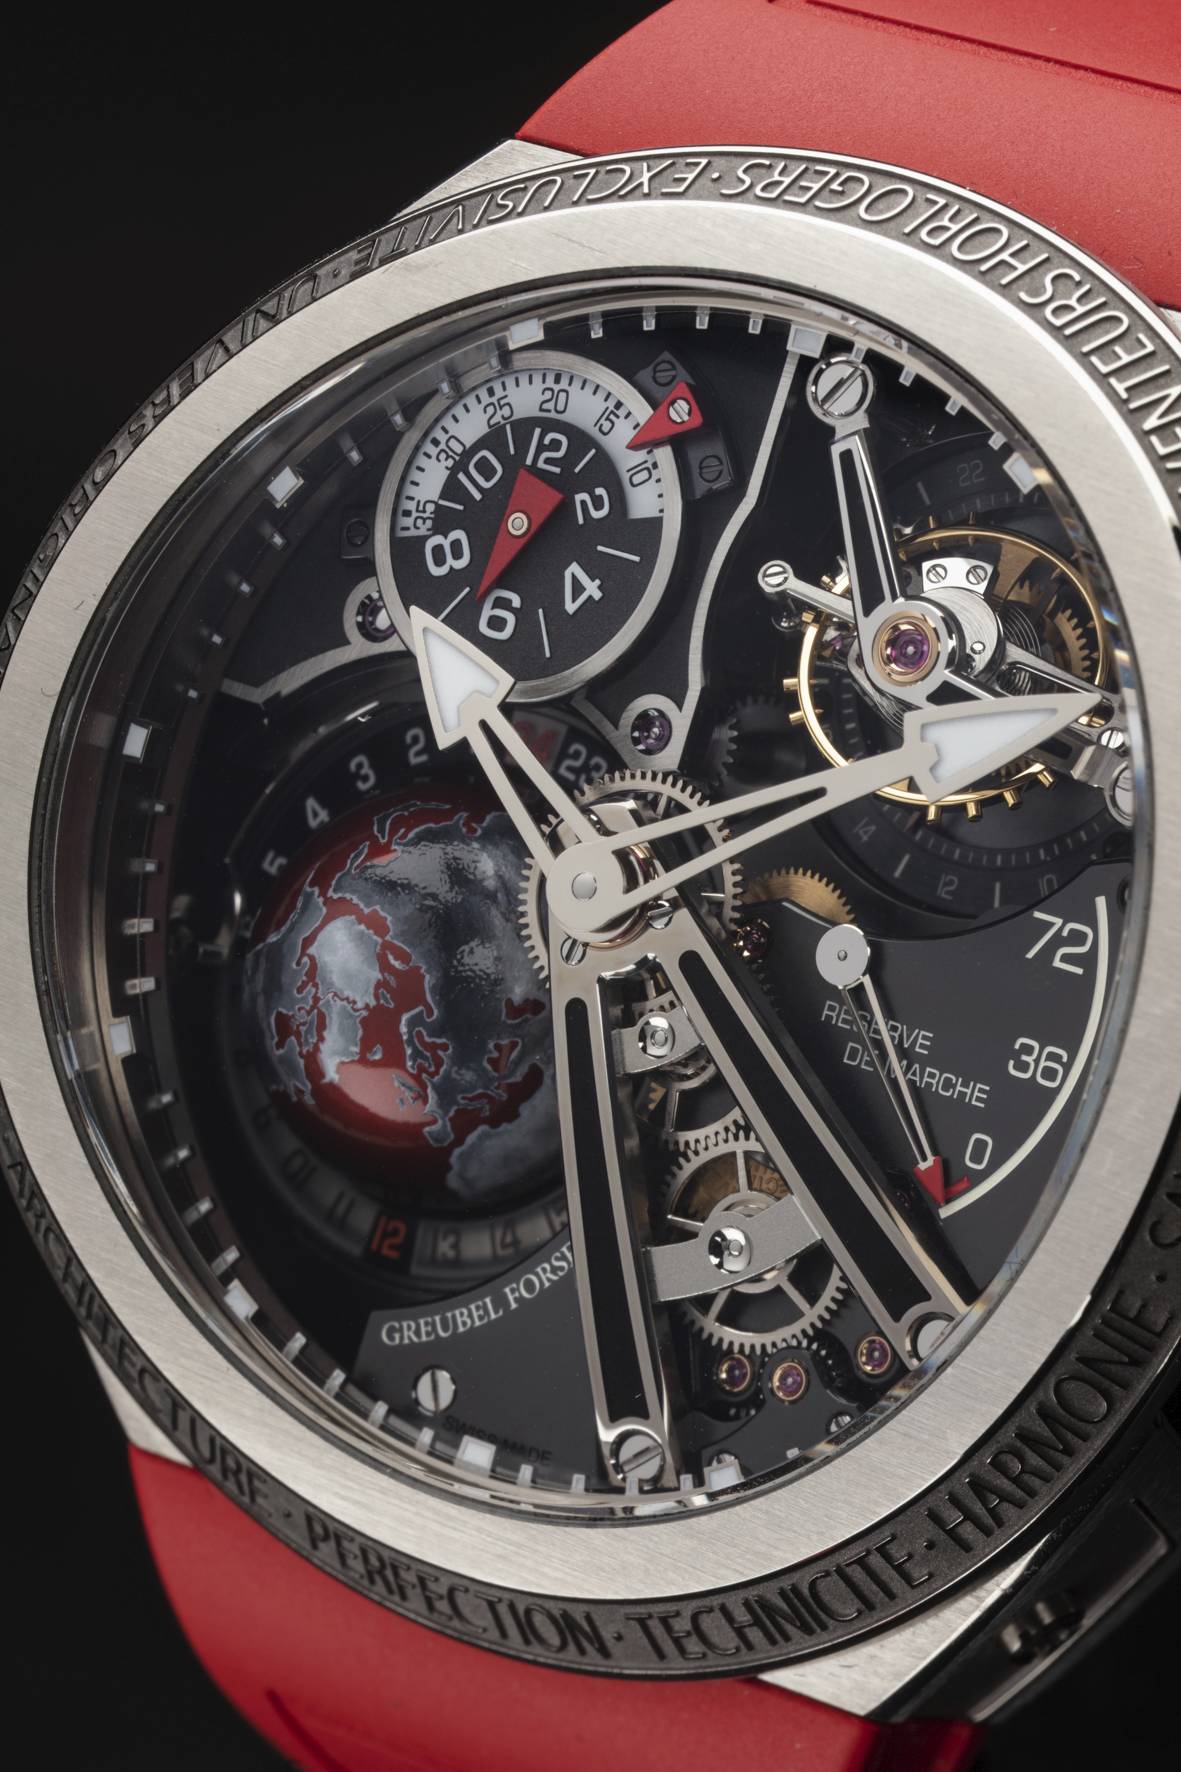 Greubel Forsey GMT Sports watch in red